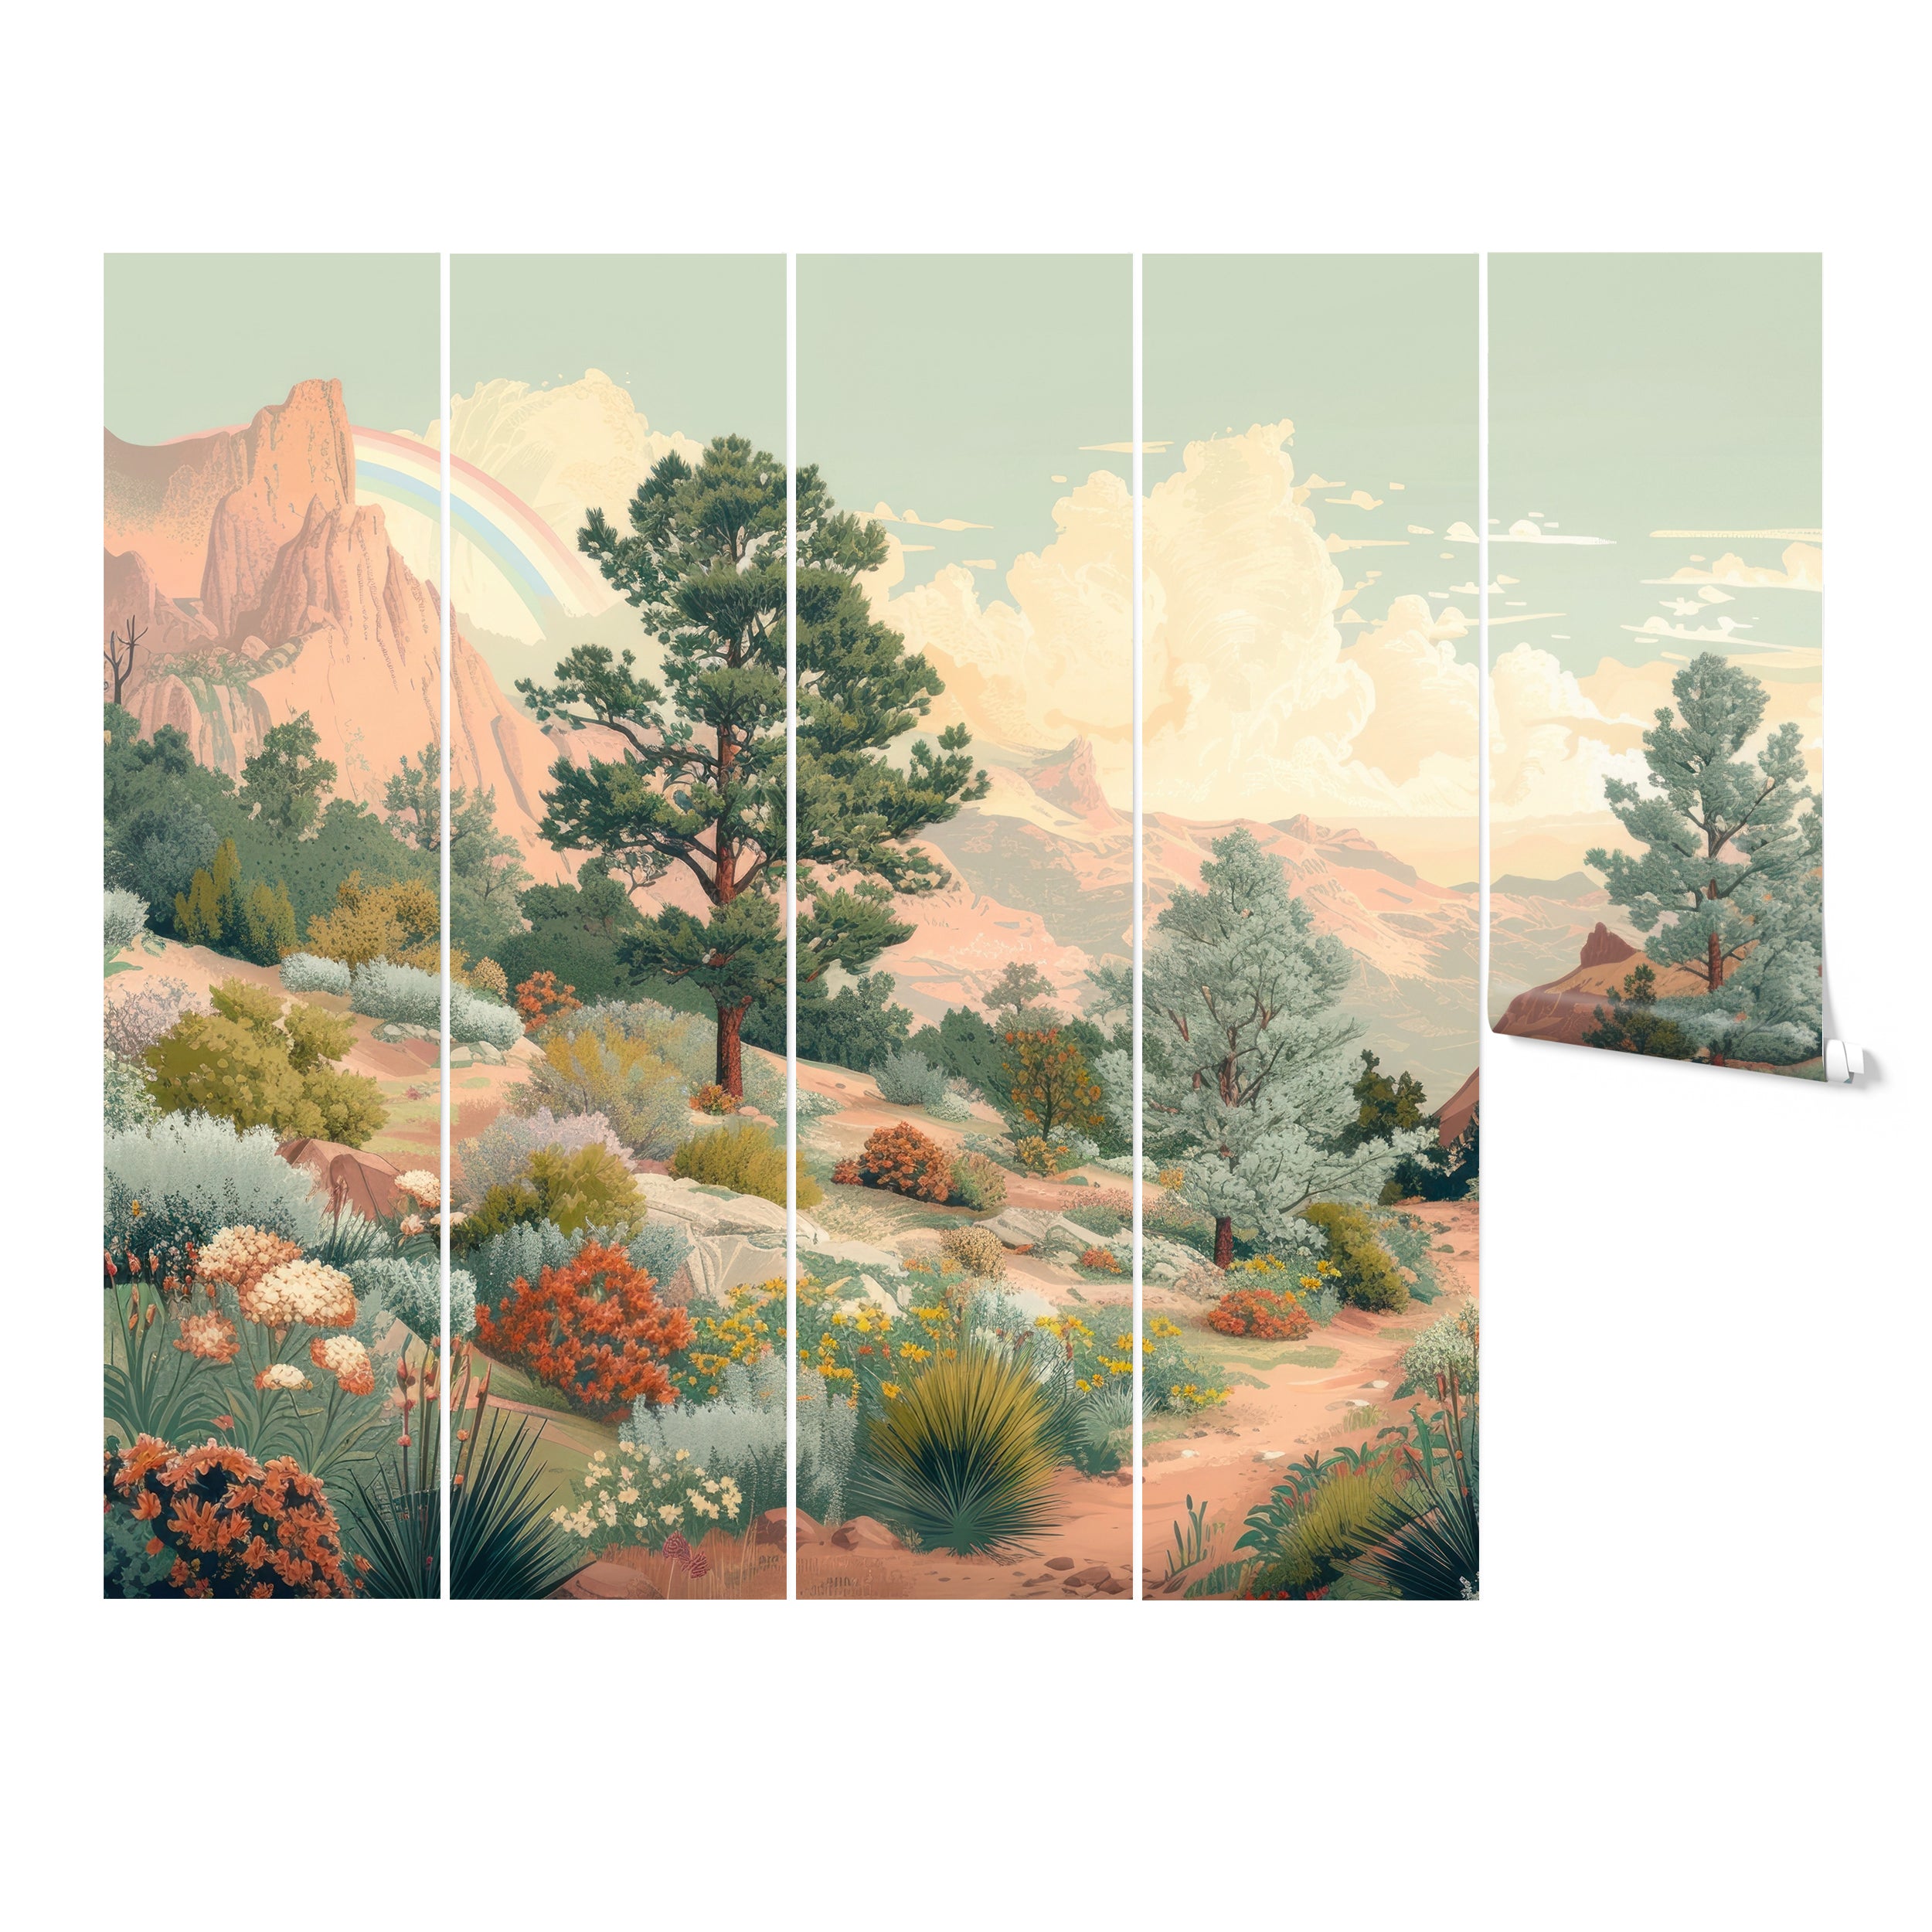 A decorative panel setup of the Desert Oasis Mural showing the complete landscape across multiple vertical panels. Each panel captures a section of the desert environment, showcasing varied vegetation and rocky terrains under a bright sky.